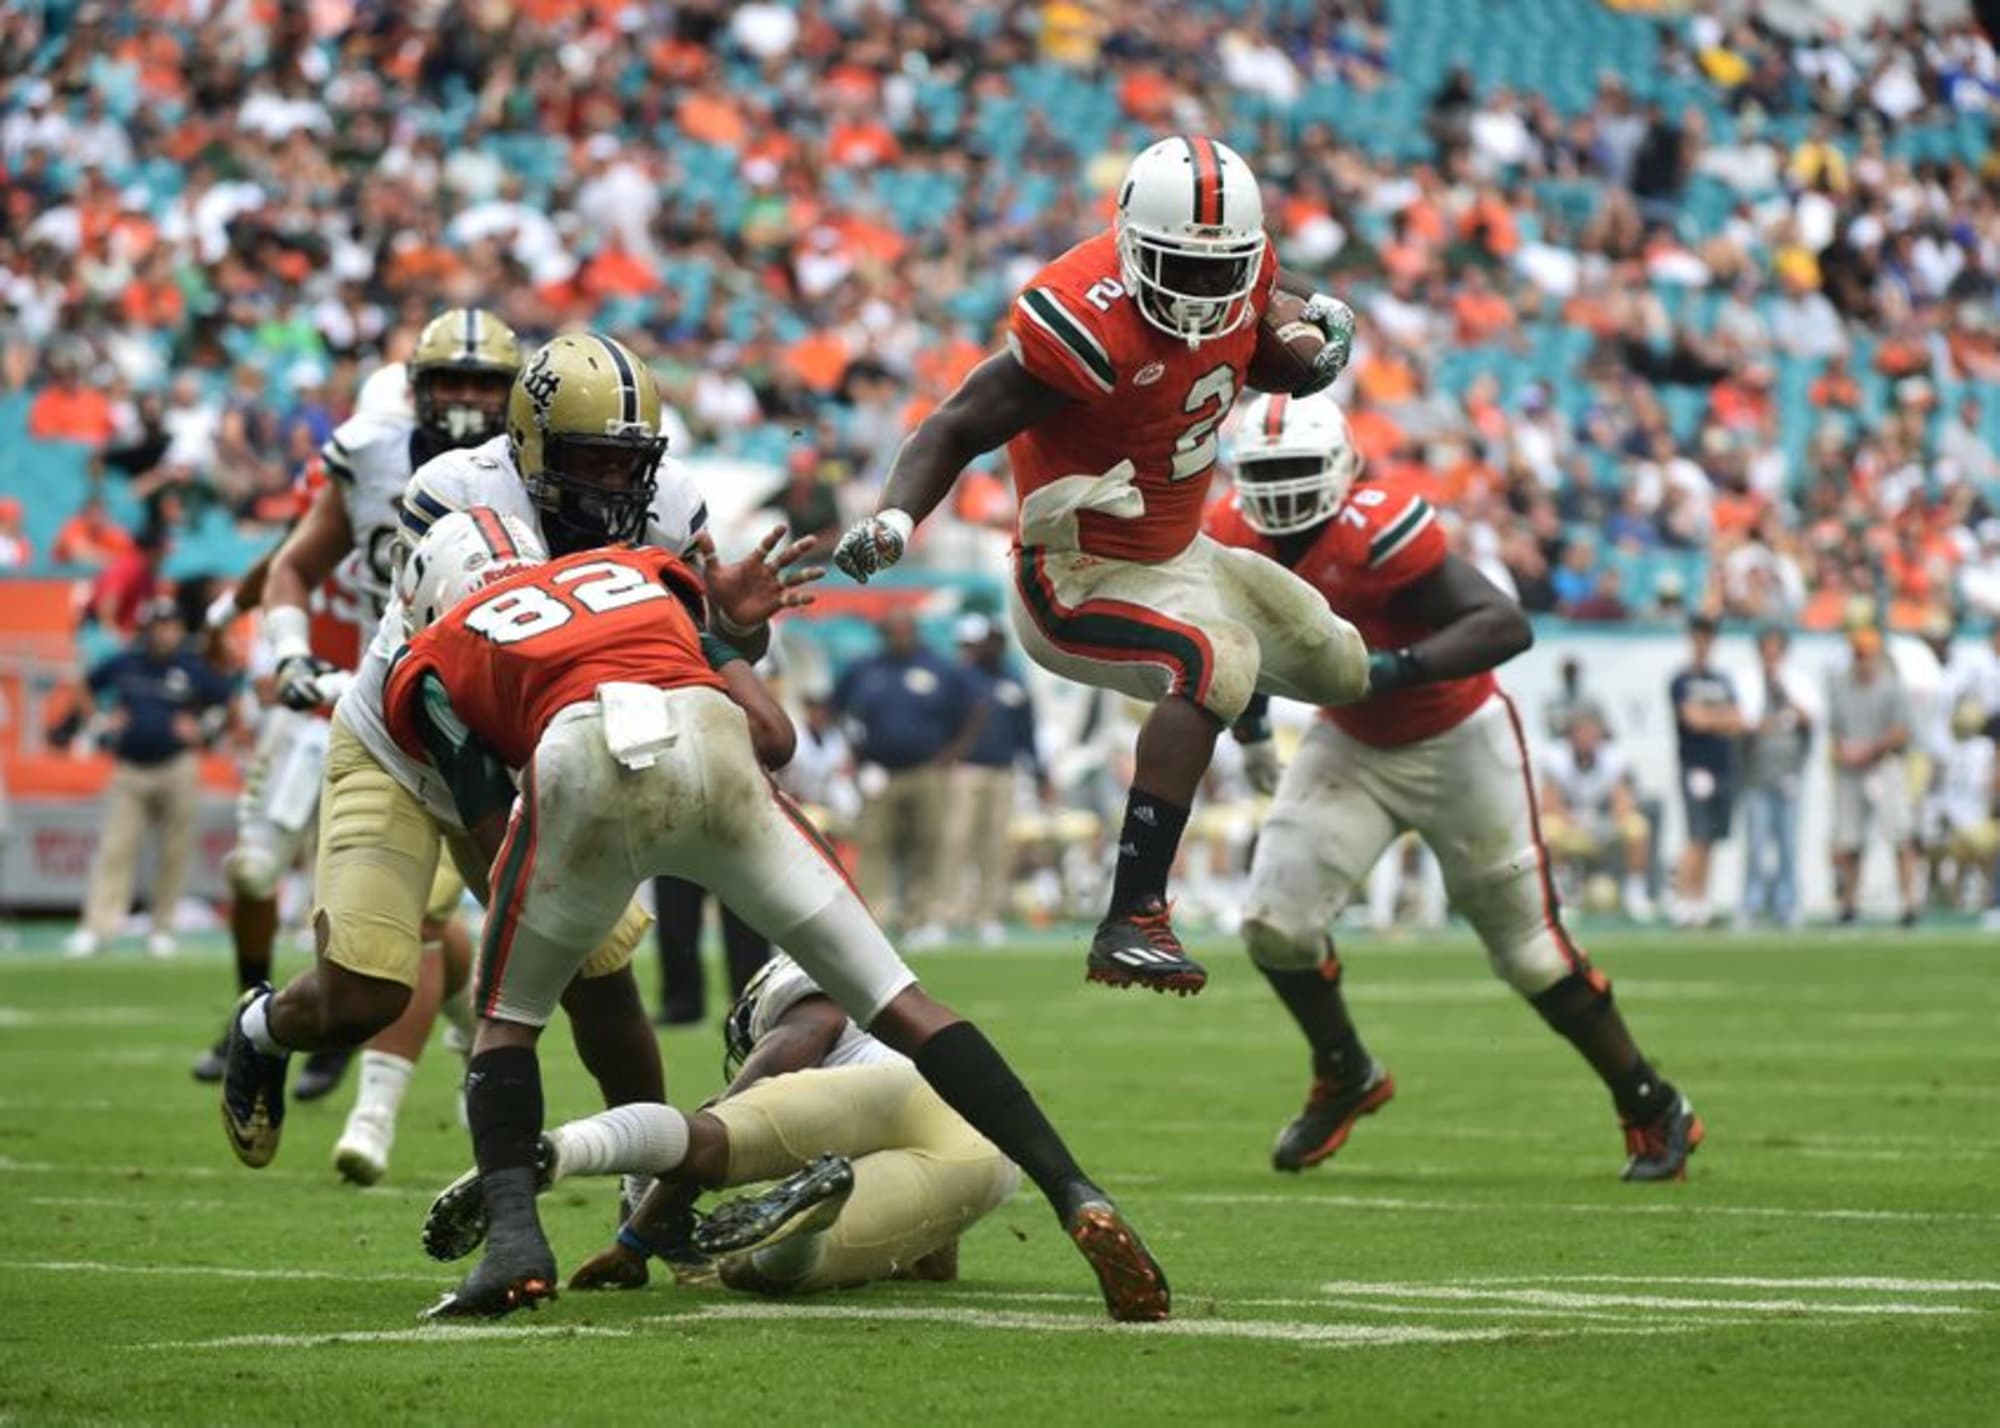 Miami Hurricanes RB Joe Yearby Declares for NFL Draft